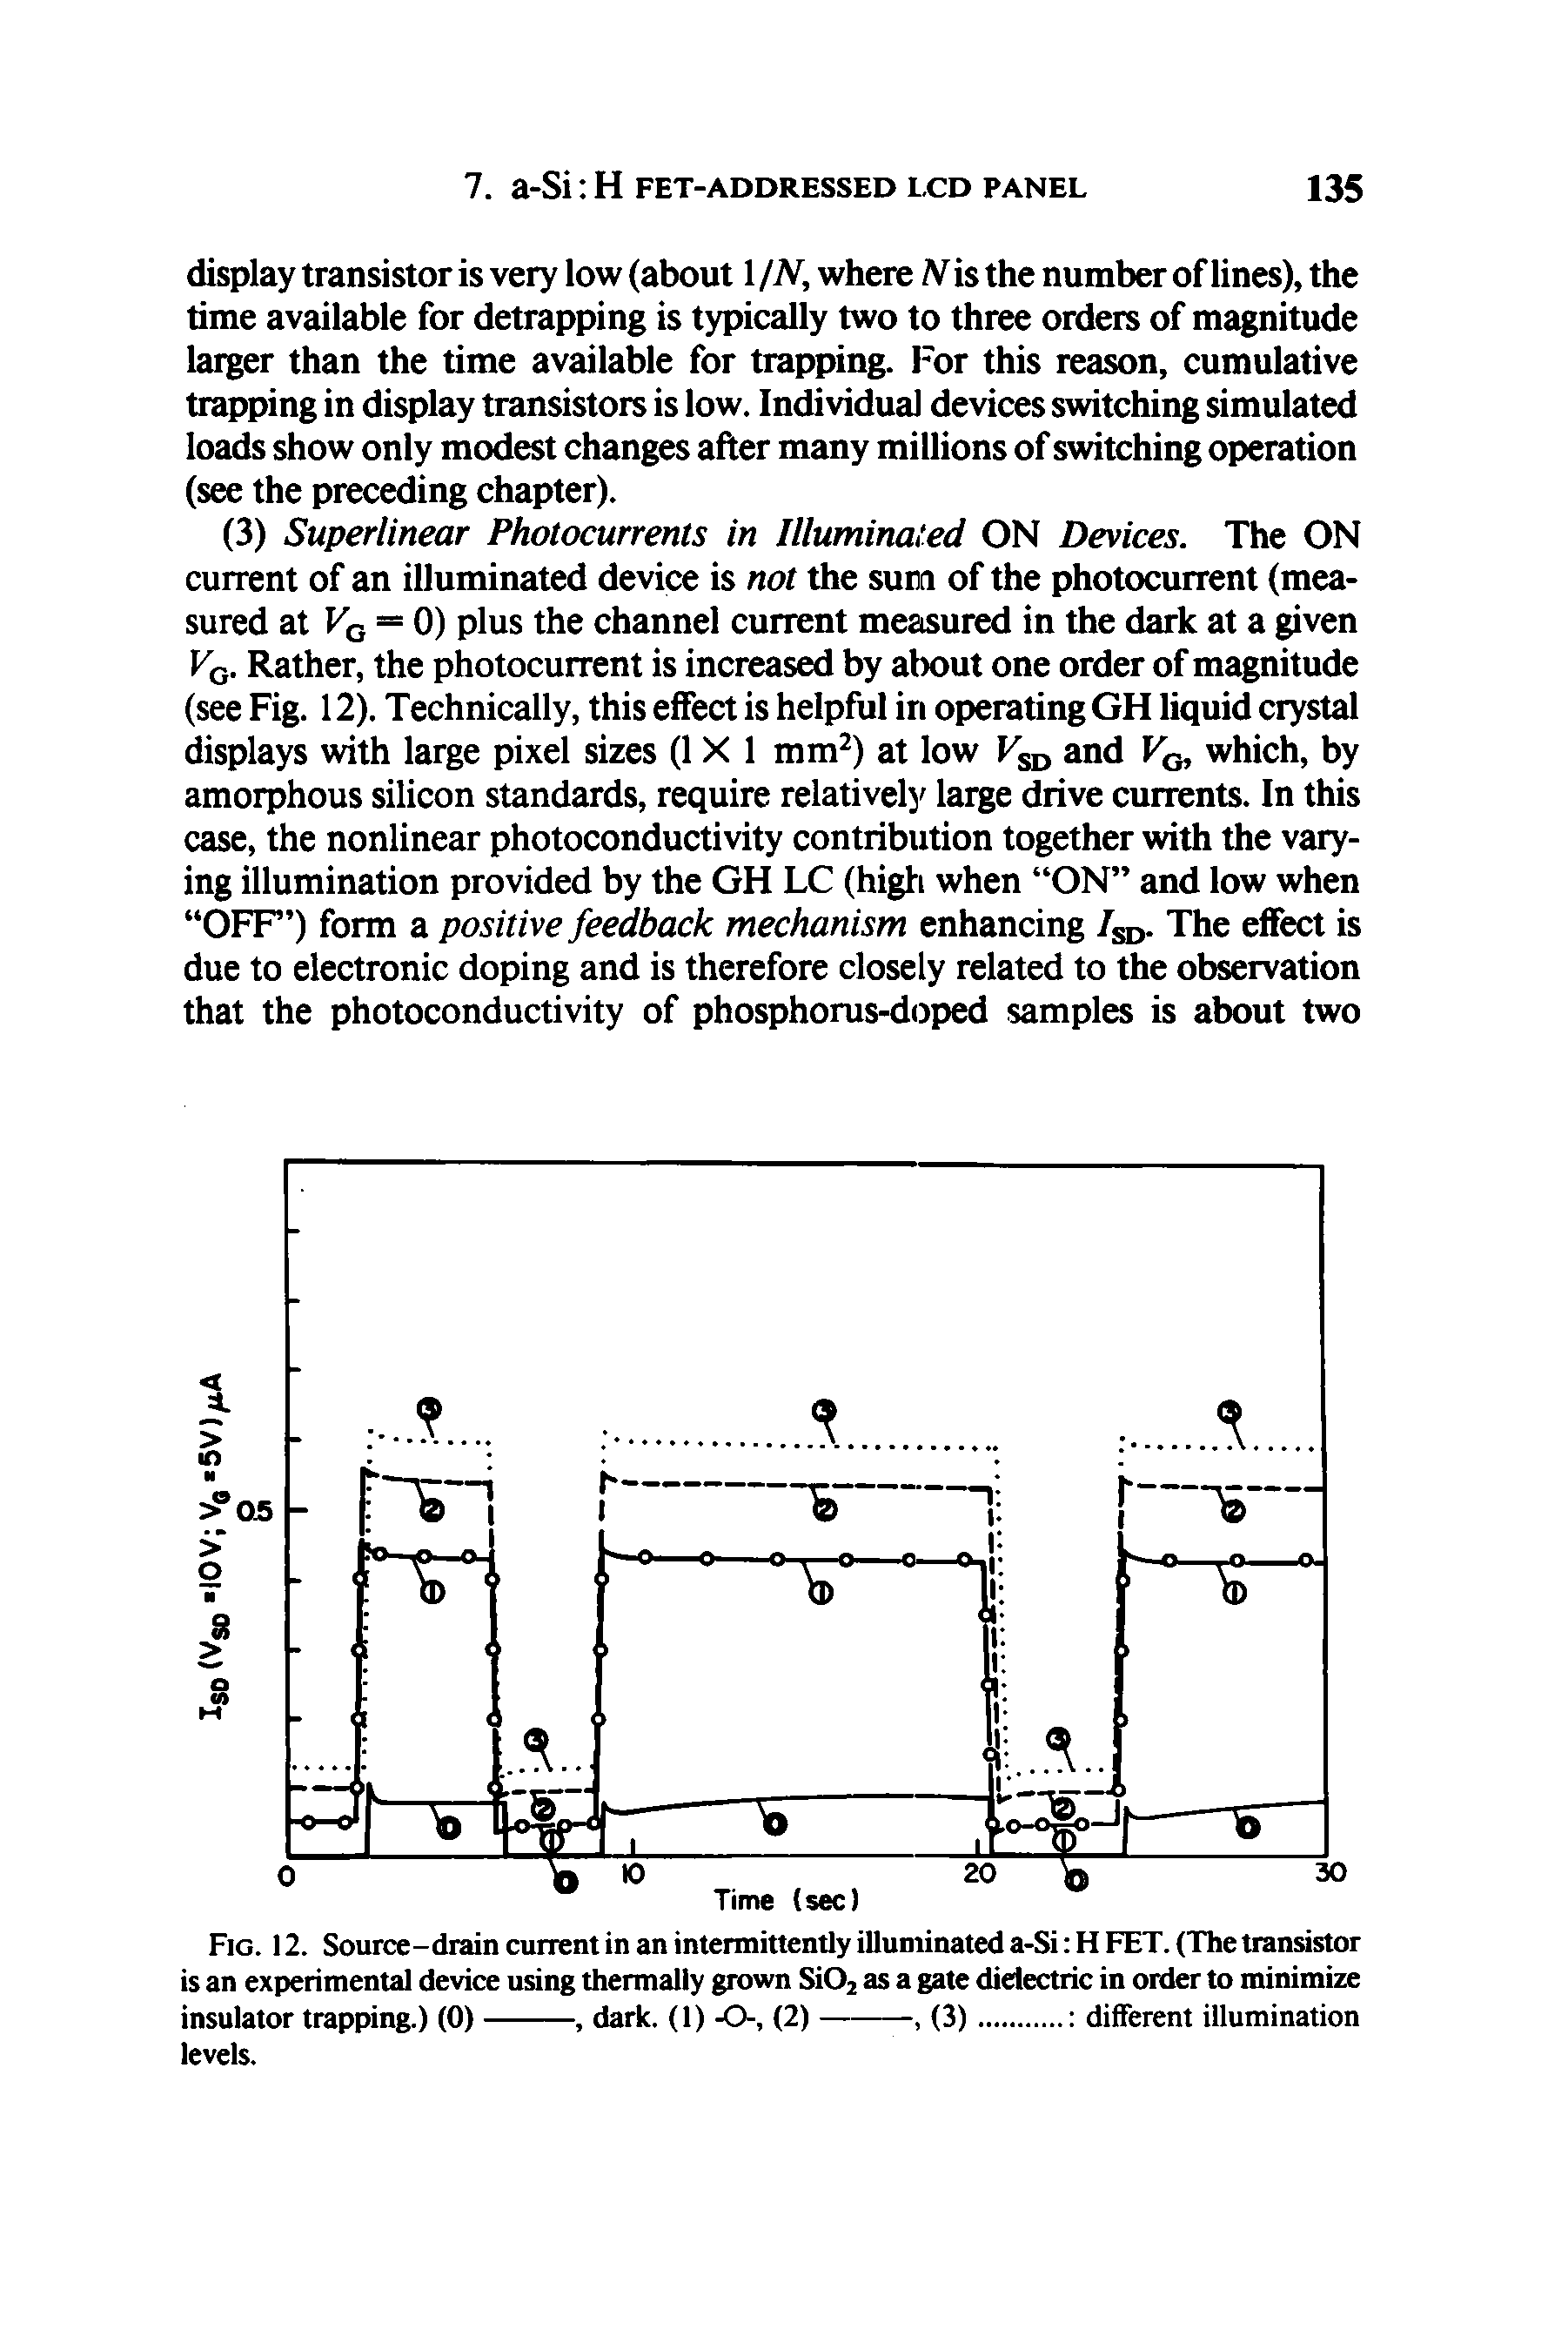 Fig. 12. Source-drain current in an intermittently illuminated a-Si H FET. (The transistor is an experimental device using thermally grown Si02 as a gate dielectric in order to minimize...